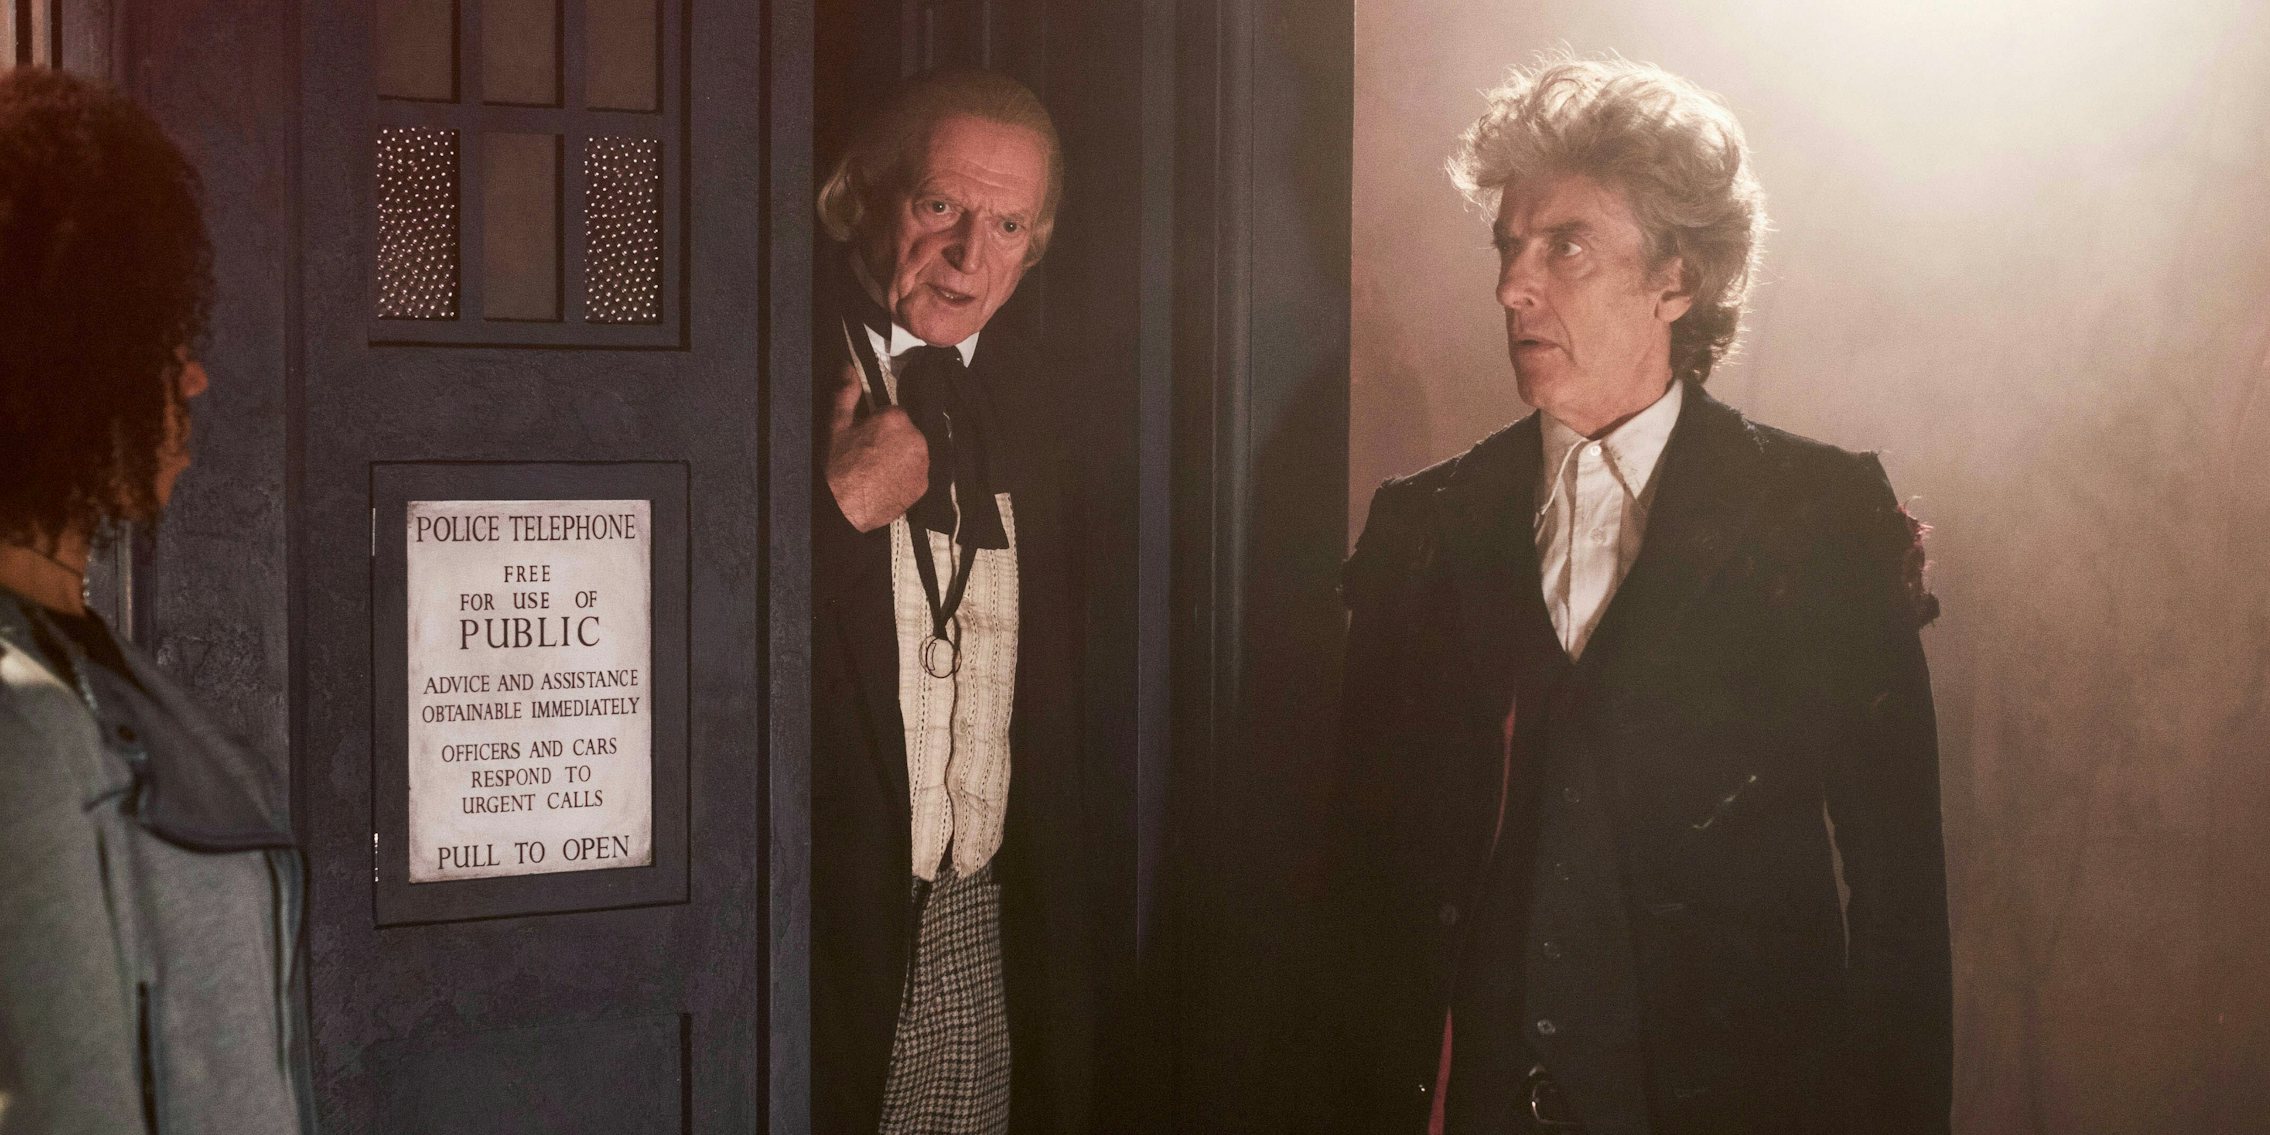 Doctor Who: Why Peter Capaldi's Twelfth Doctor Wears A Ring